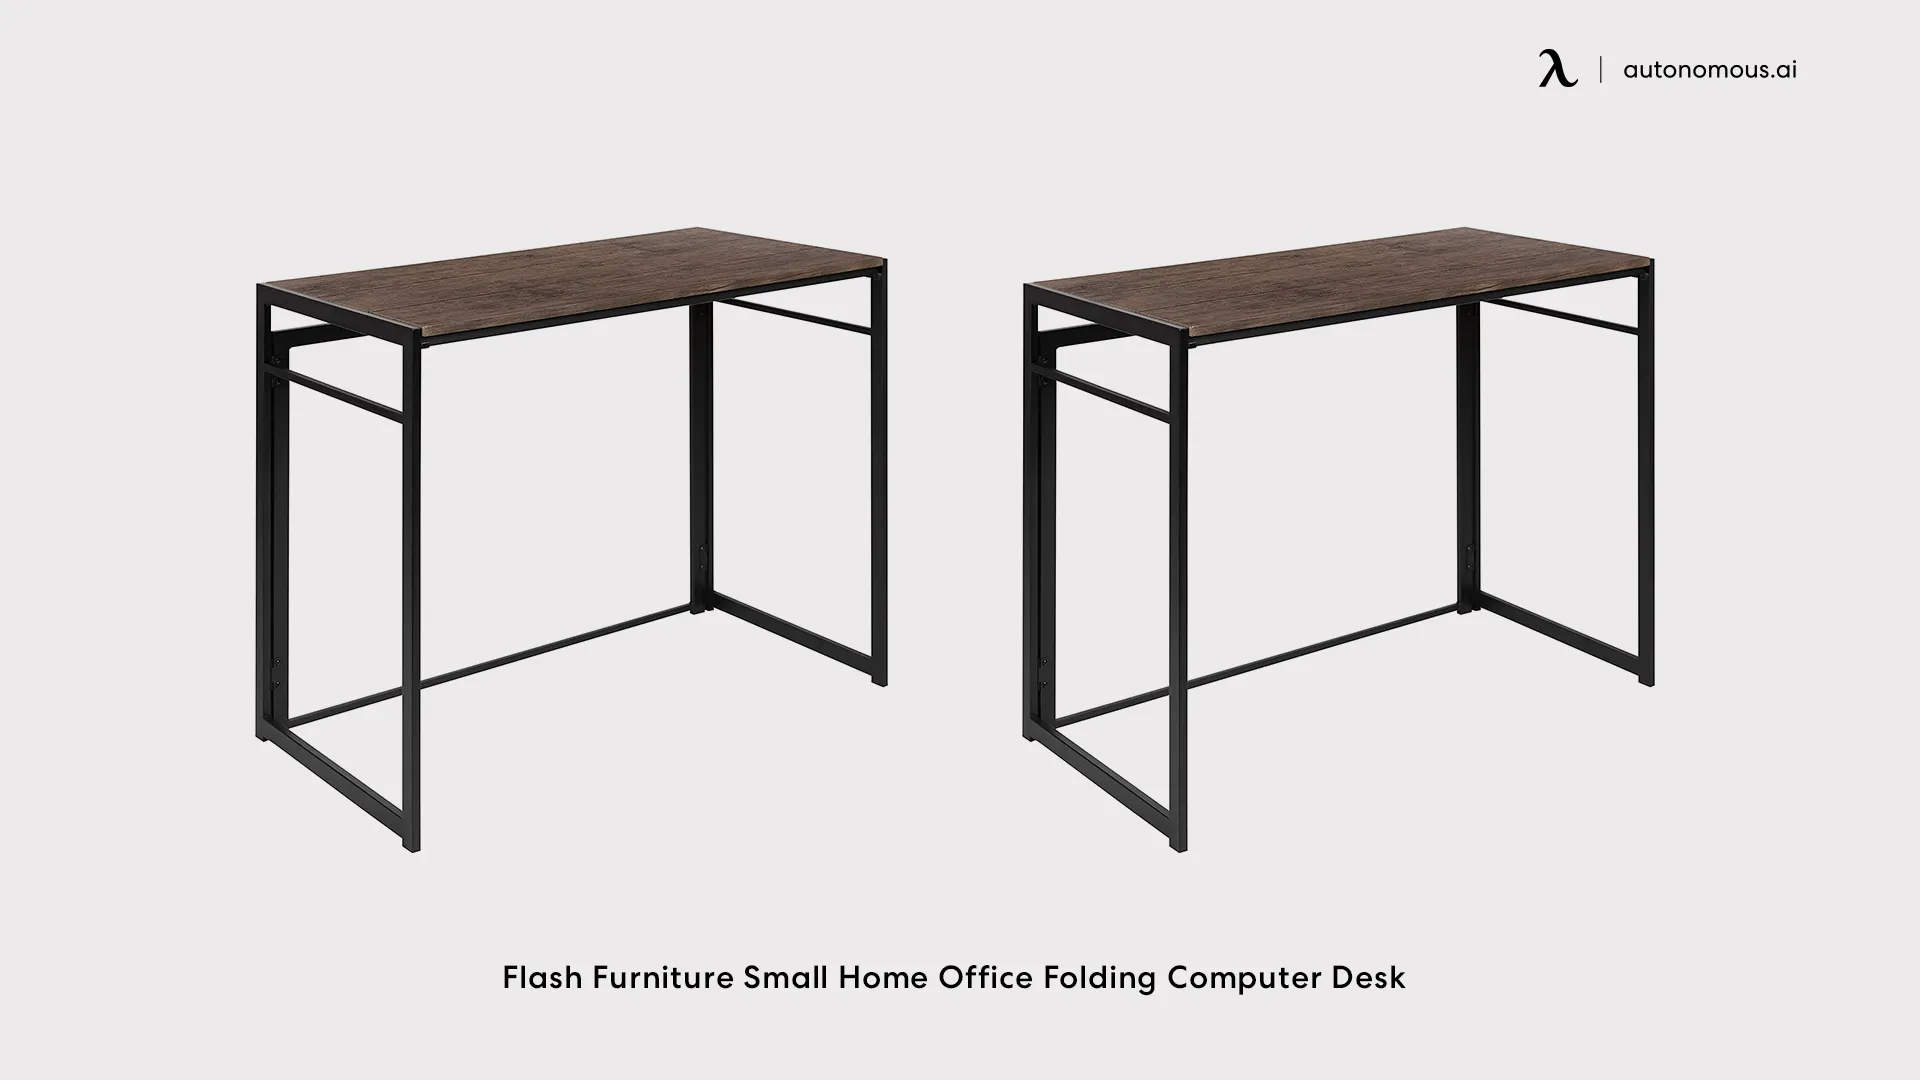 Flash Furniture Small Home Office Folding Computer Desk